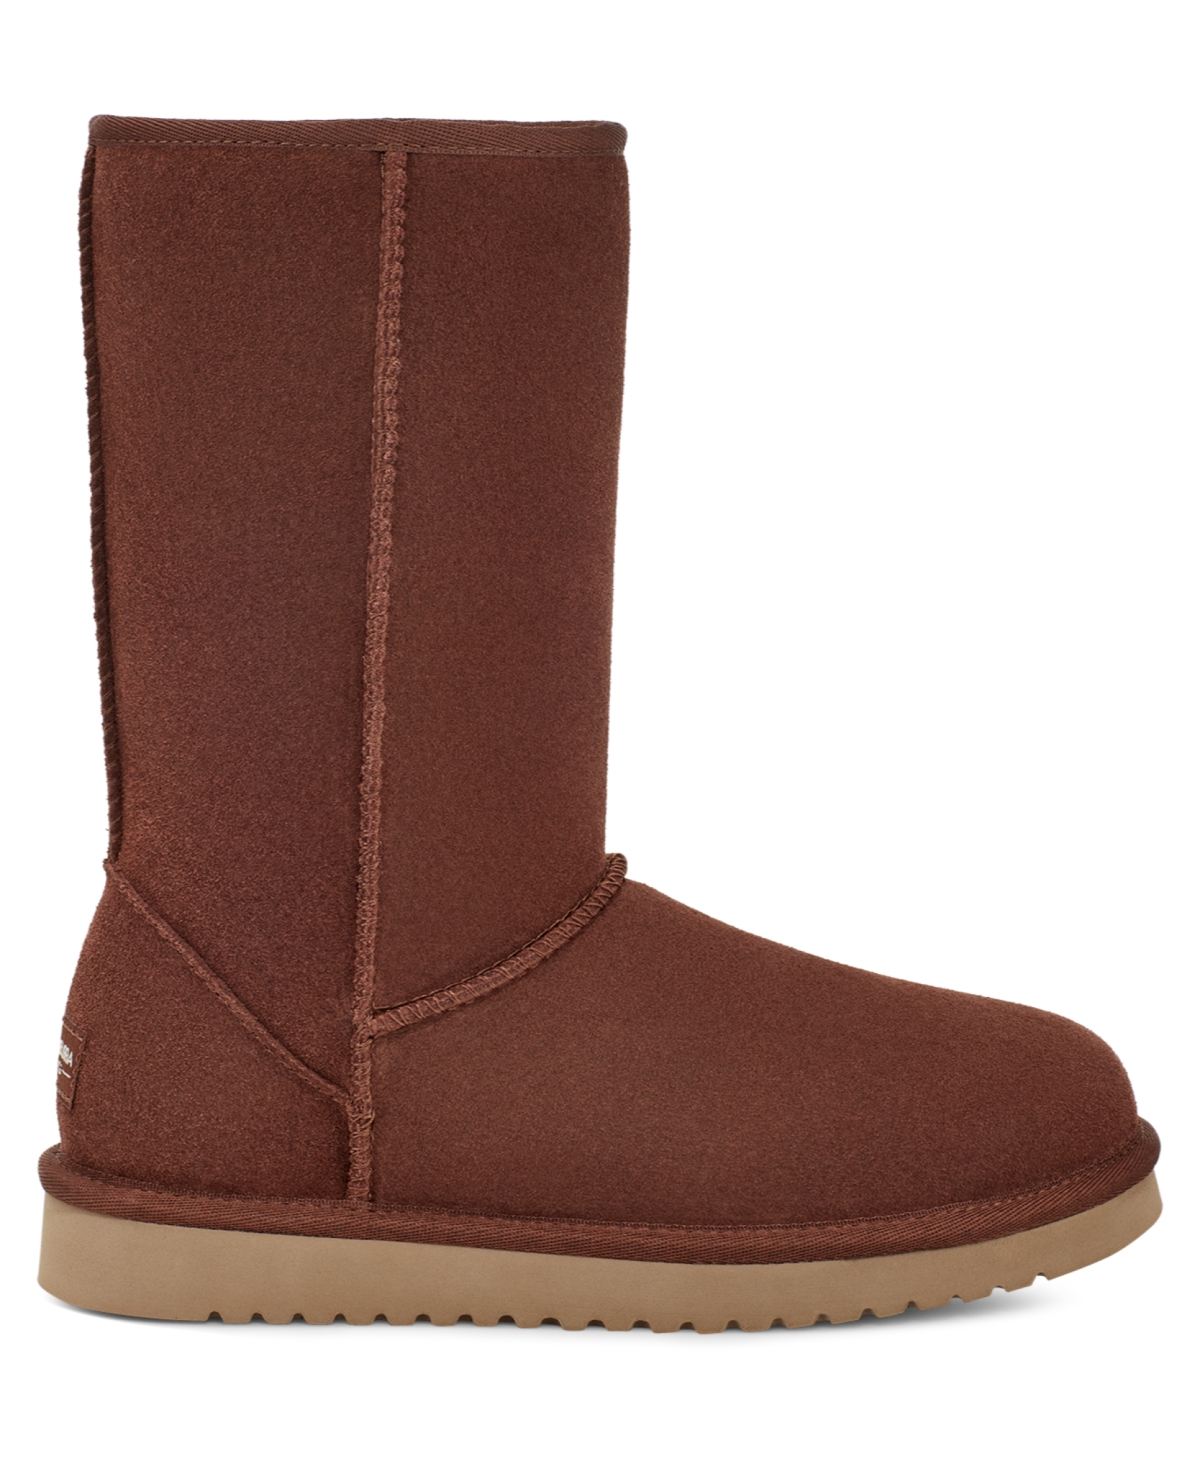 Koolaburra By Ugg Women's Classic Tall Boots In Cappuccino